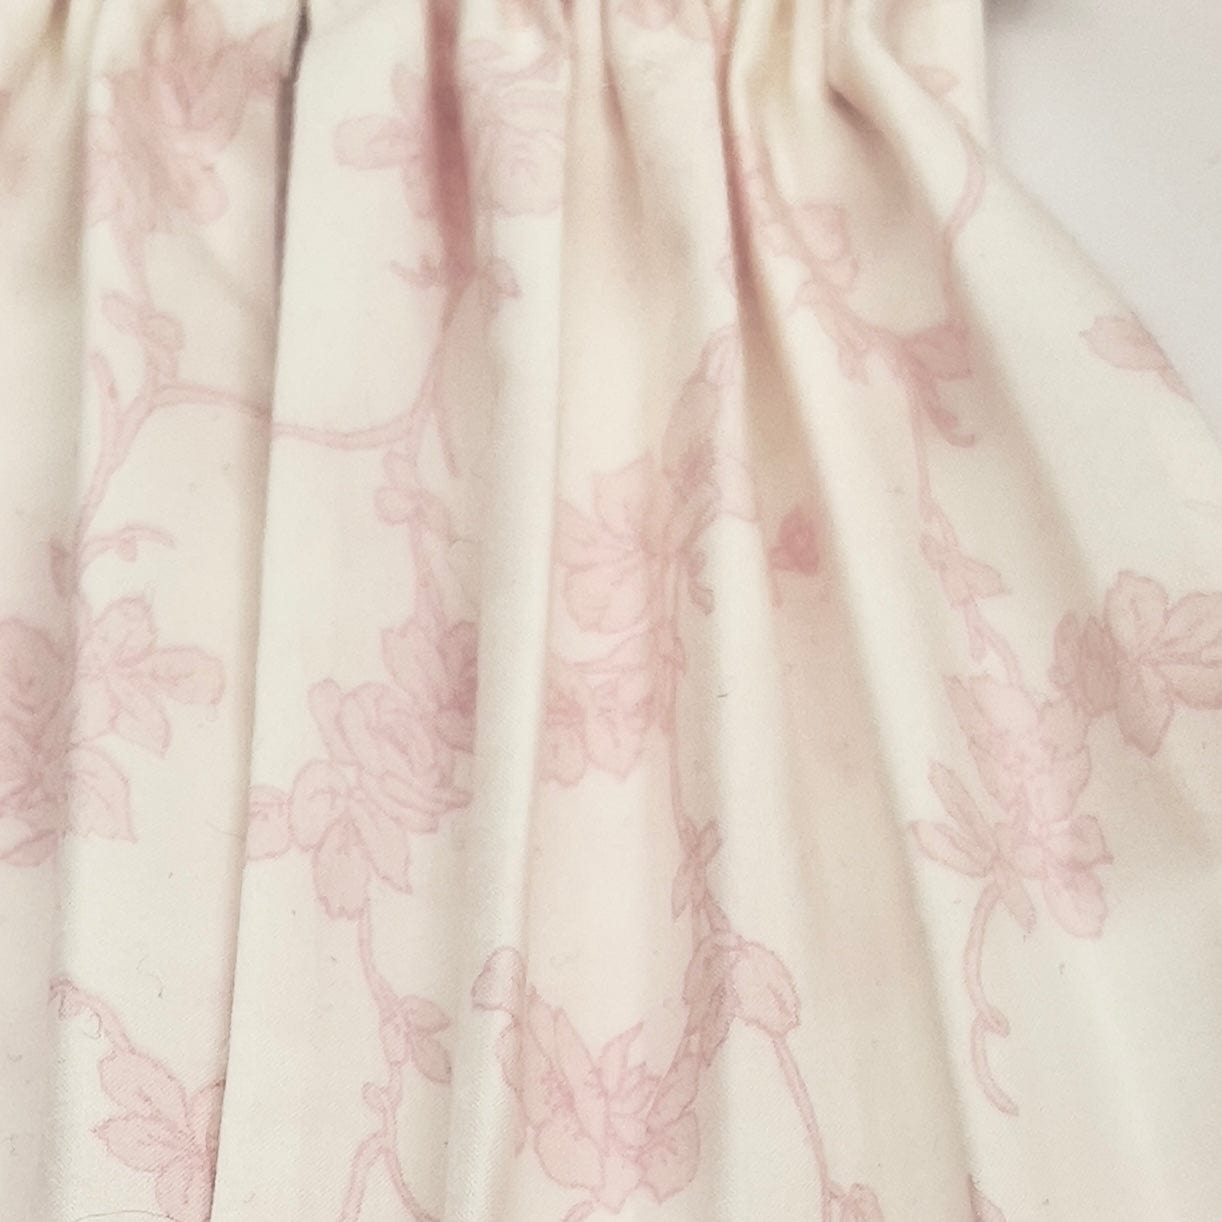 Chantallena Doll House Dollhouse Accessories CURTAINS- Faded Pink and White Floral Vines 2 Panel Cotton Curtains | Faded Floral Vine | Soft Furnishings